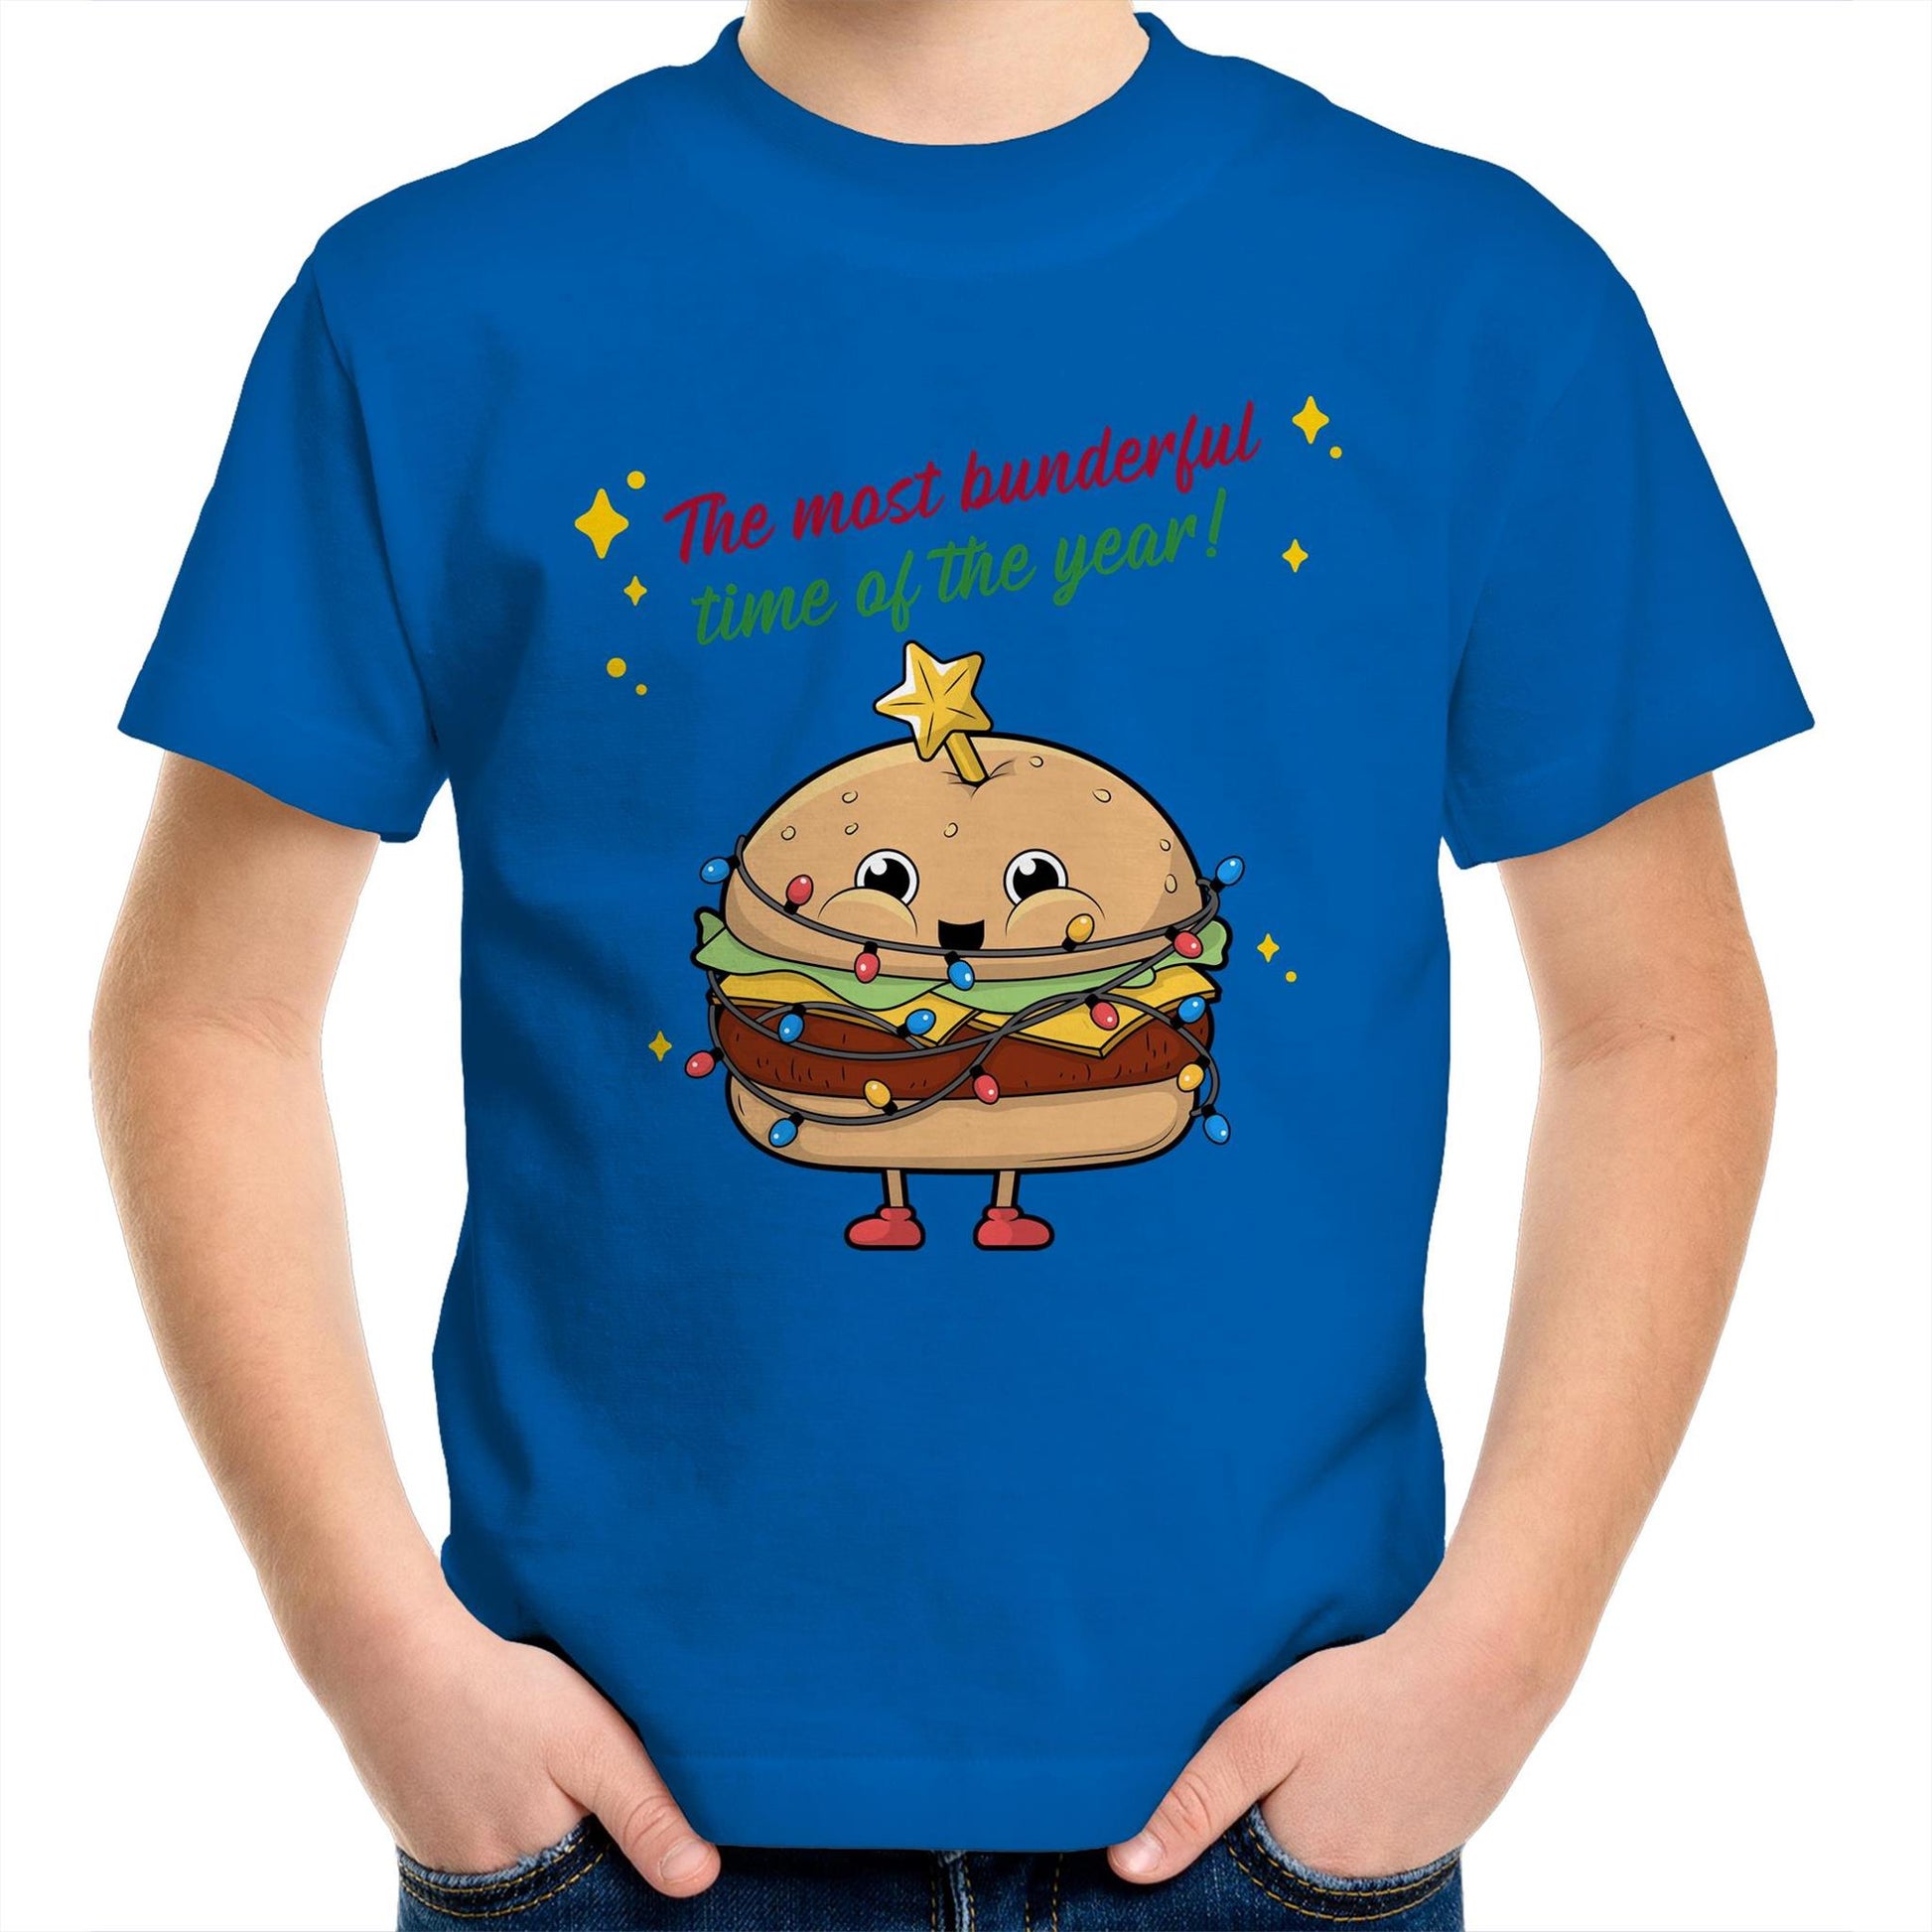 The Most Bunderful Time Of The Year - Kids Youth Crew T-Shirt Bright Royal Christmas Kids T-shirt Merry Christmas